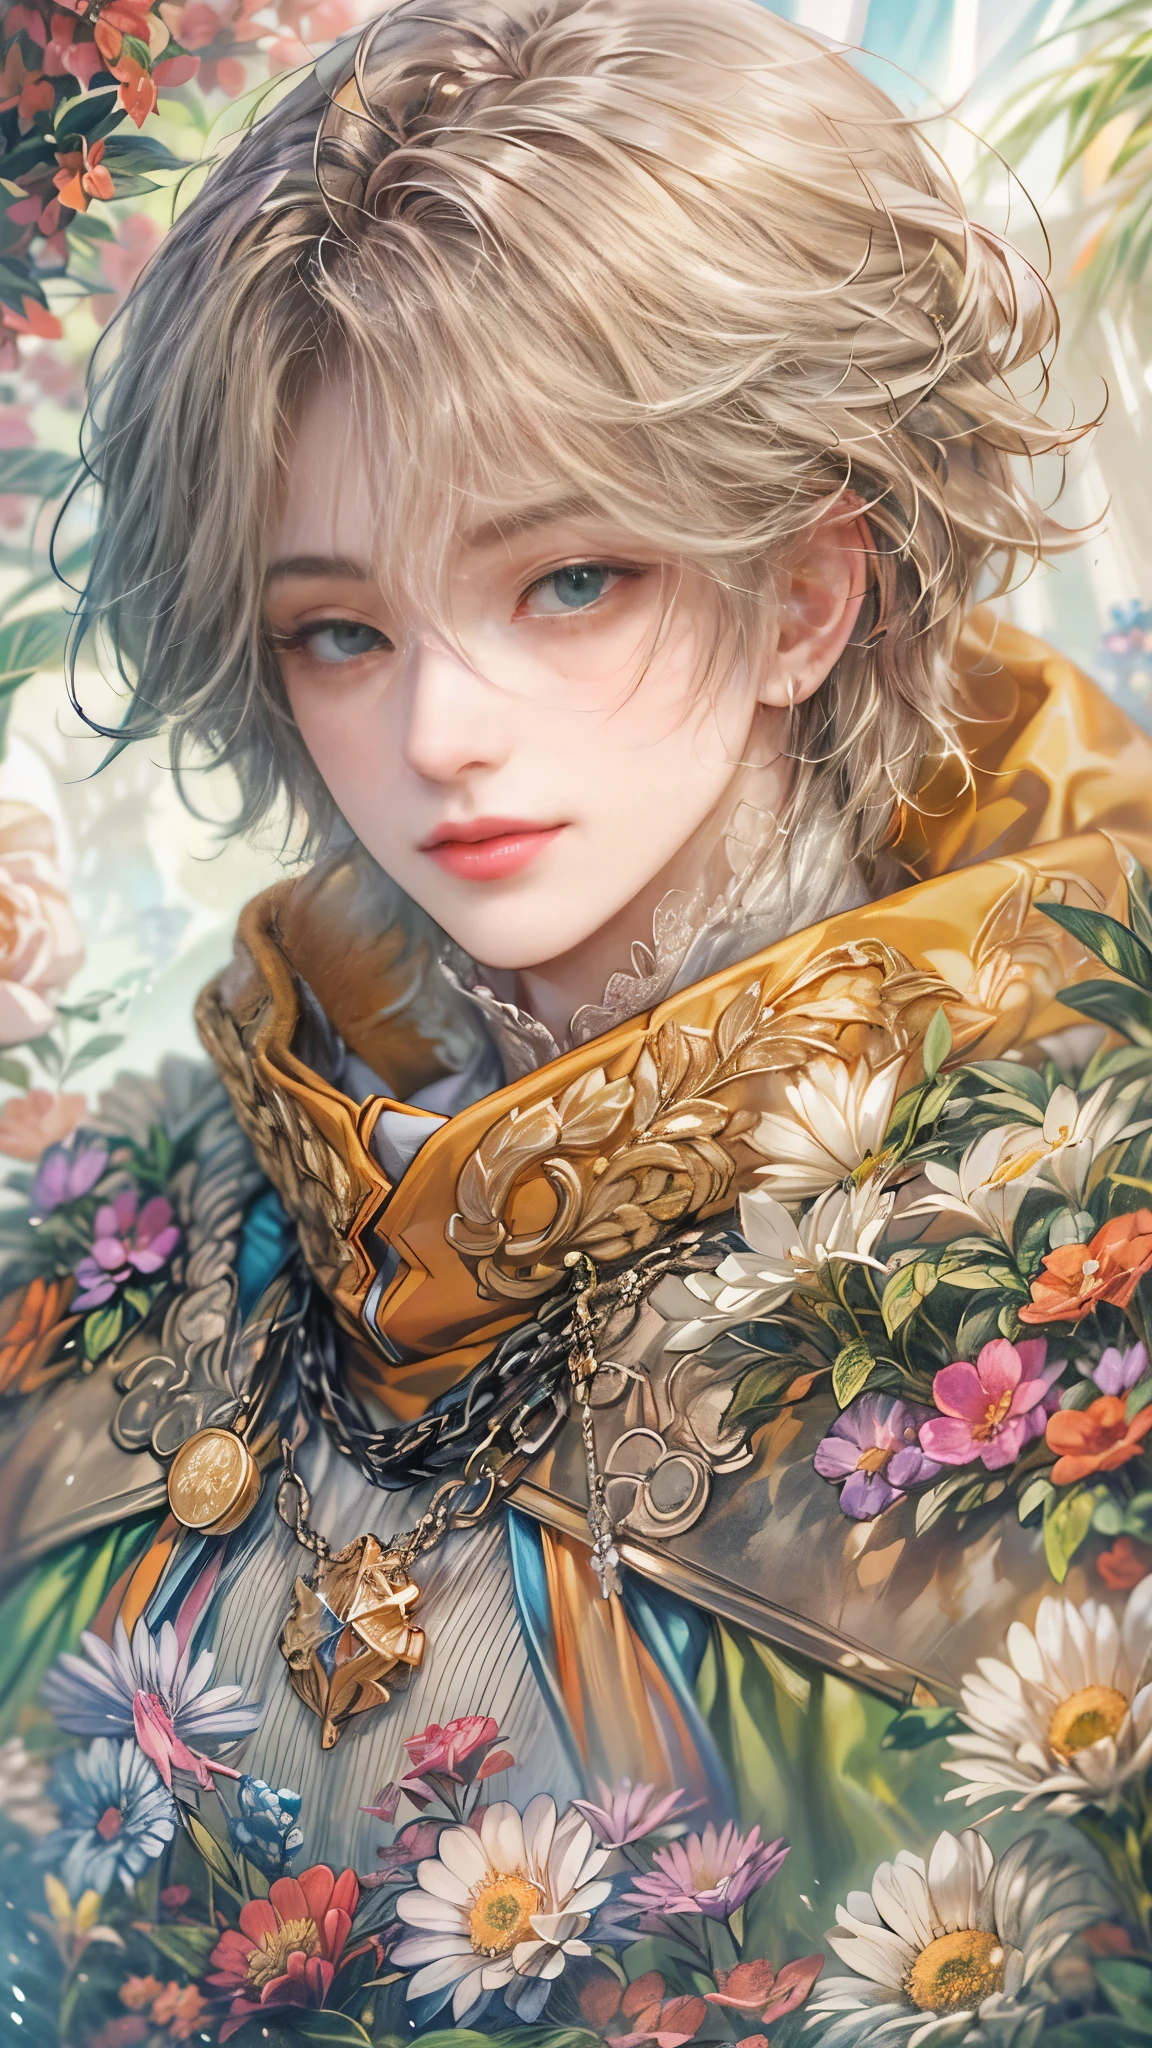 (absurdres, highres, ultra detailed, HDR), masterpiece, Intricate details,best quality picture of a character from Octopath Traveler, handsome teen boy with random Hair color between peach, apricot, periwinkle, cream, red, blue, green, orange, yellow, or purple, anime eyes, Hero Outfit showing Chest with cape in a random color, detailed outside garden cathedral scenery, detailed character, art kenouji